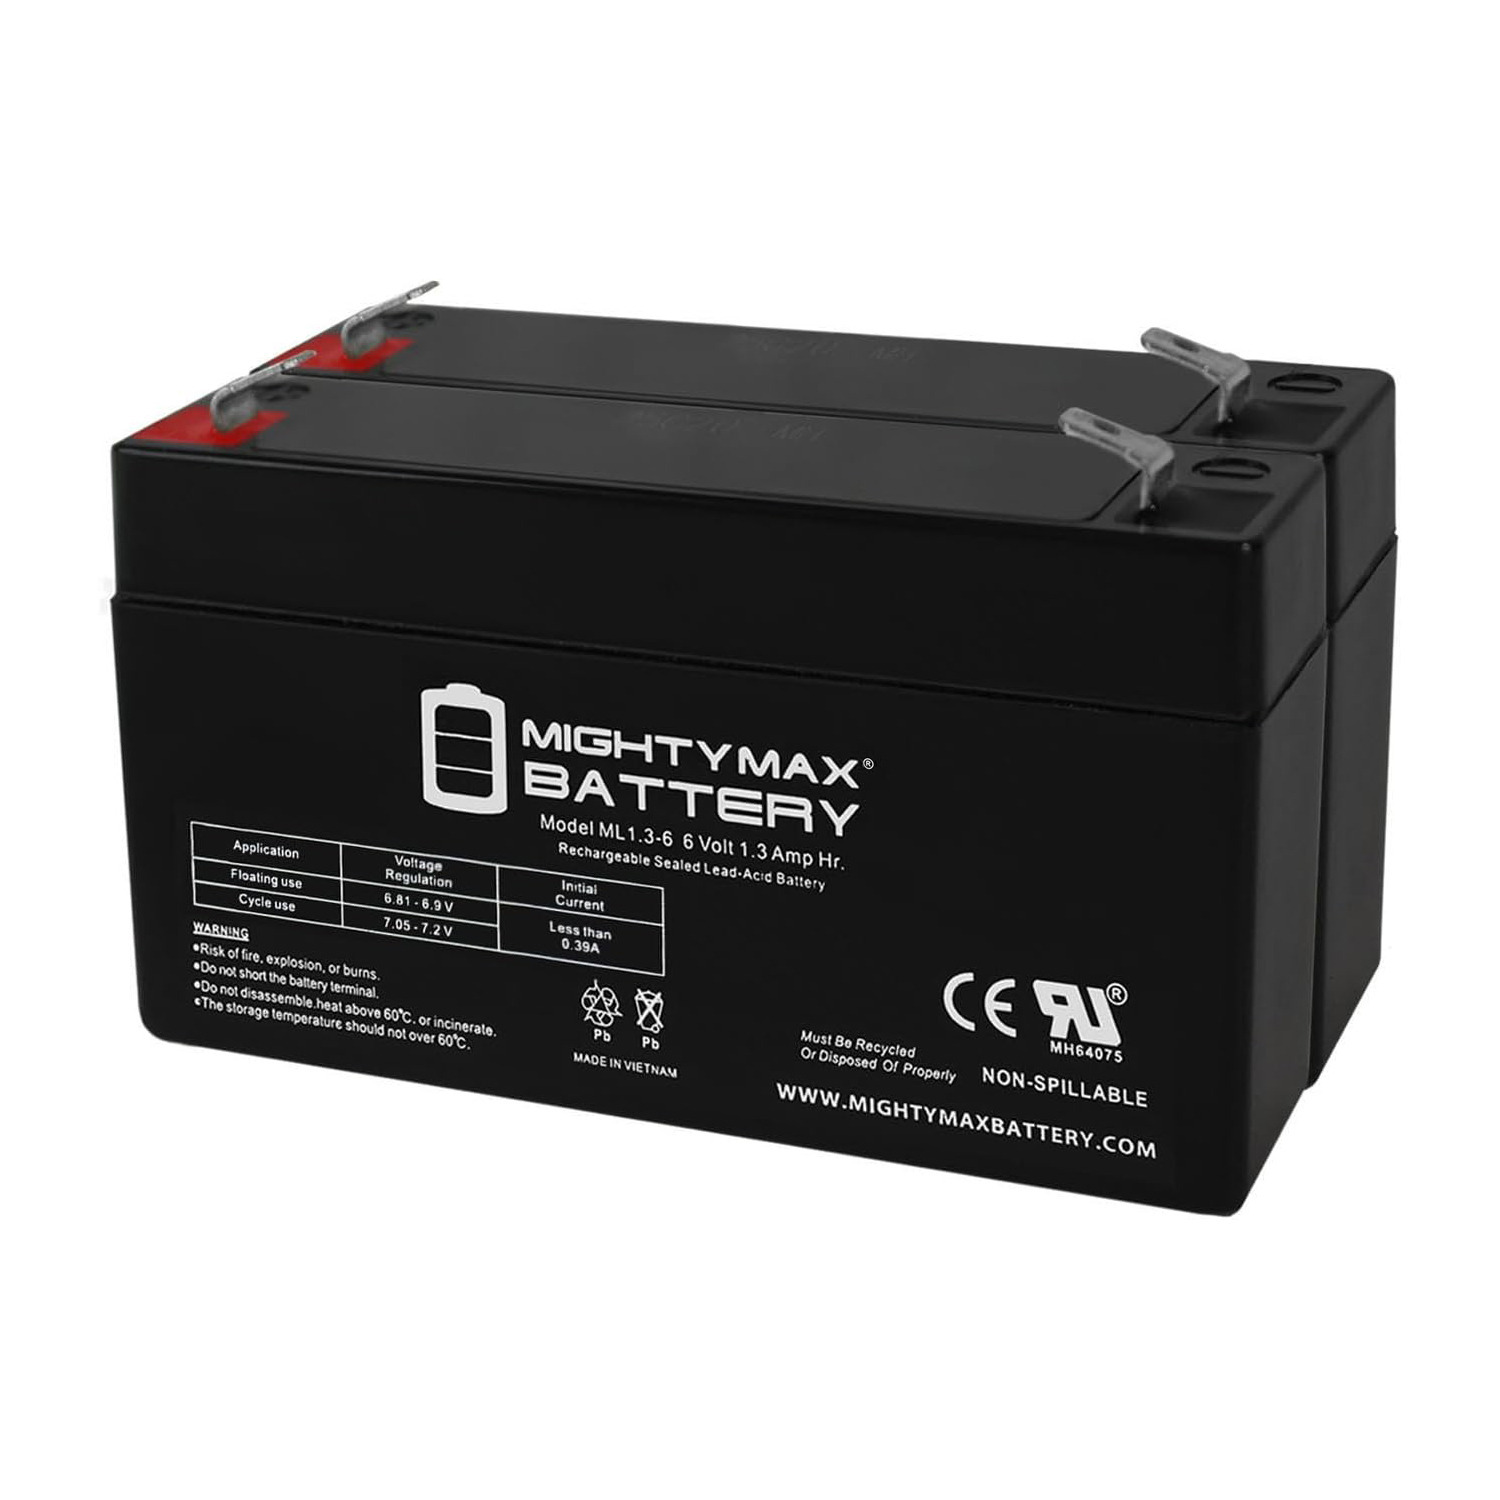 6V 1.3Ah SLA Replacement Battery for Powercell PC613 - 2 Pack